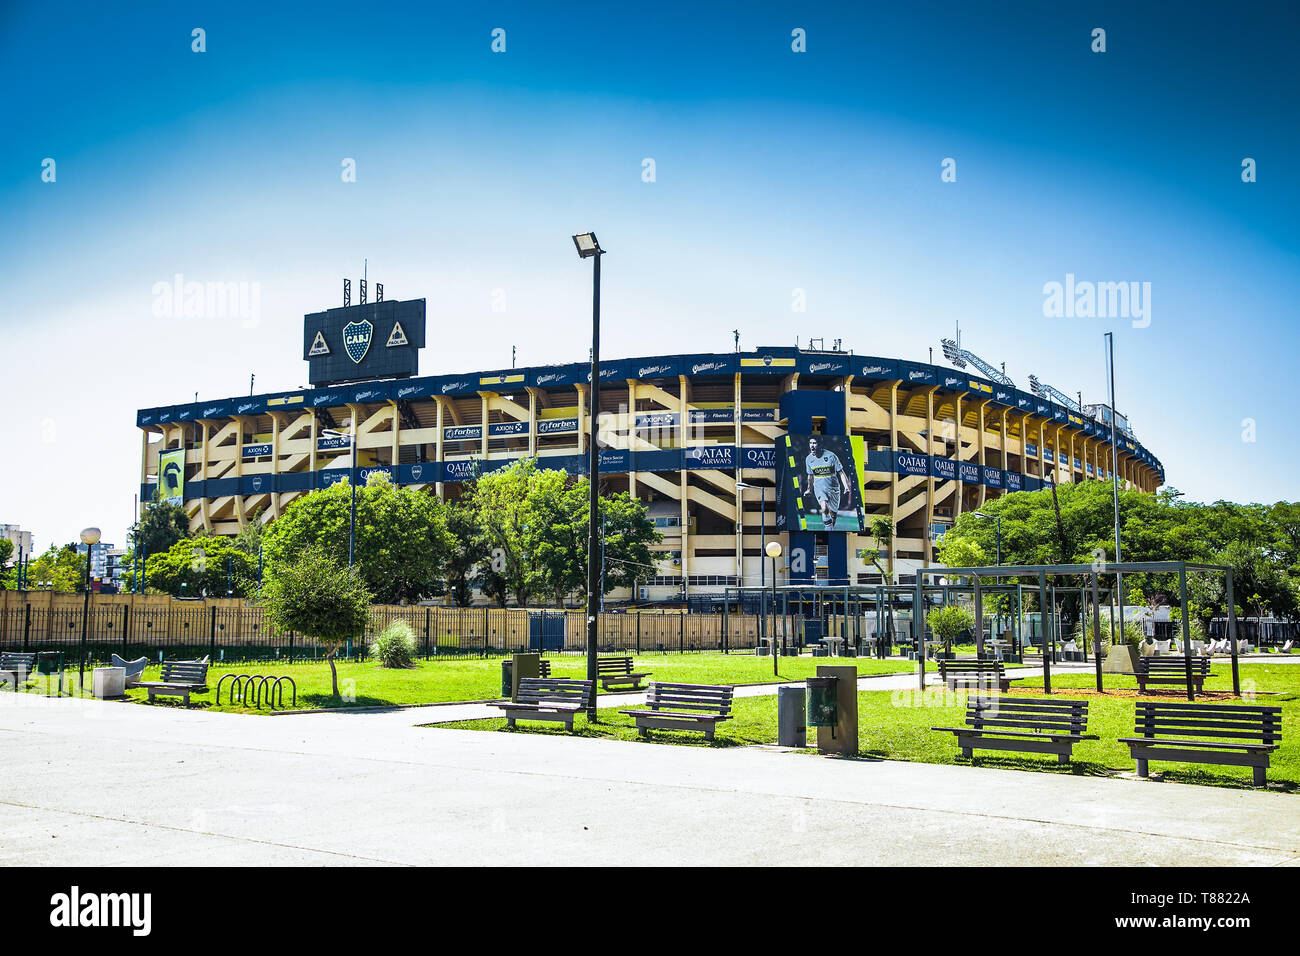 Buenos Aires Argentina - Dec 25, 2018: Outside architecture & colors of Boca Juniors team stadium also known as 'La Bombonera' hosts one of Argentina  Stock Photo